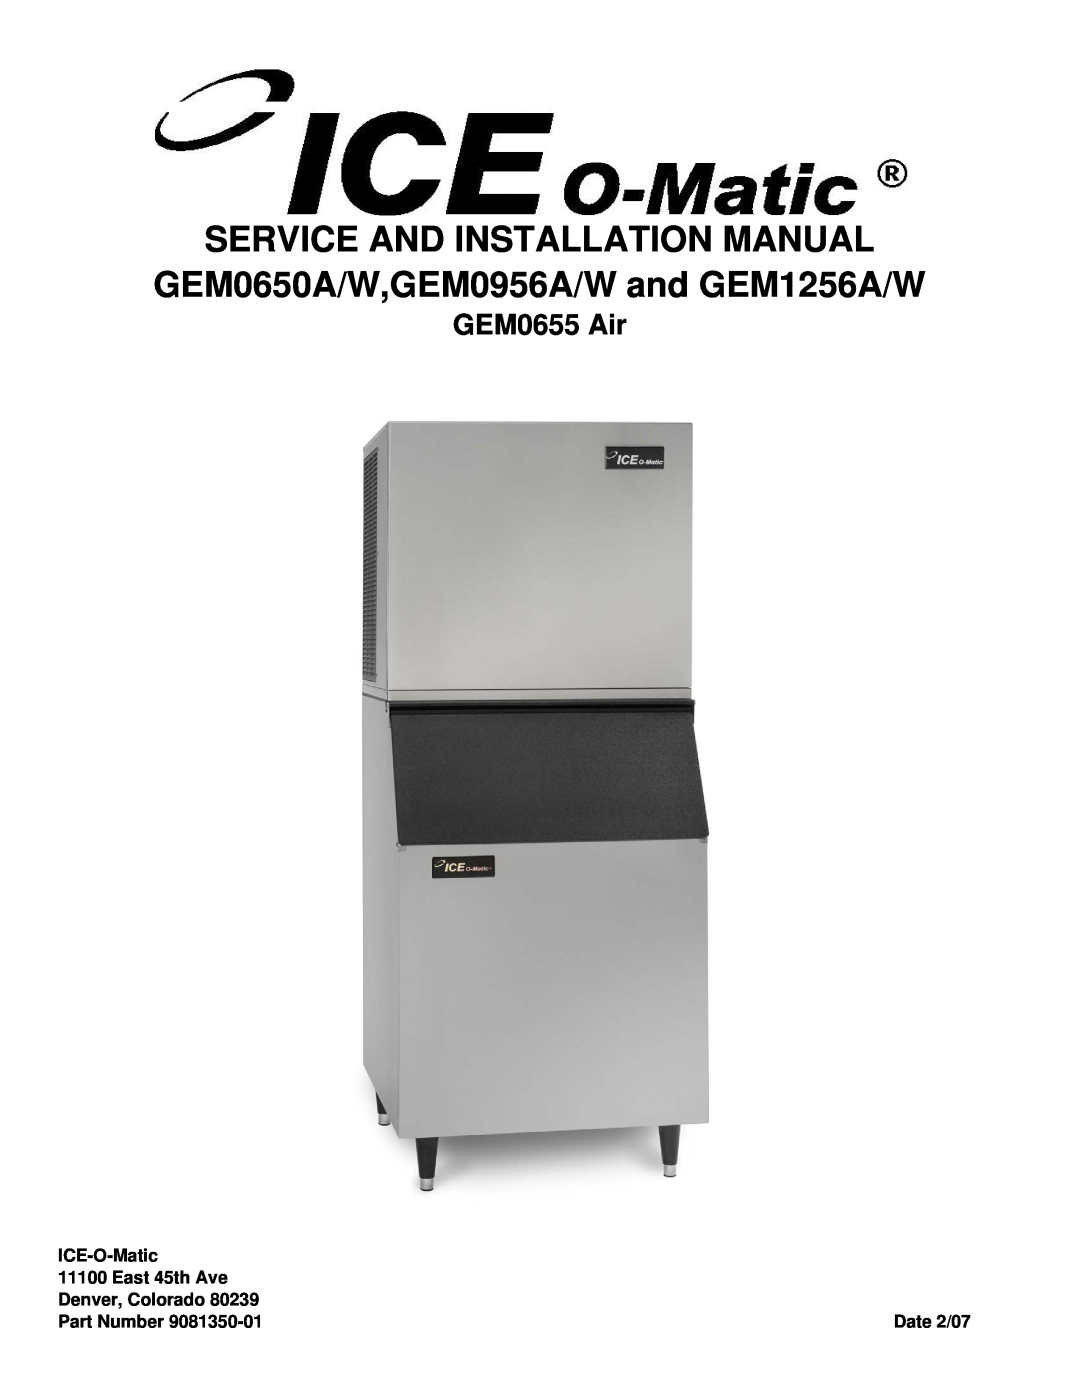 Ice-O-Matic installation manual Service And Installation Manual, GEM0650A/W,GEM0956A/W and GEM1256A/W, GEM0655 Air 